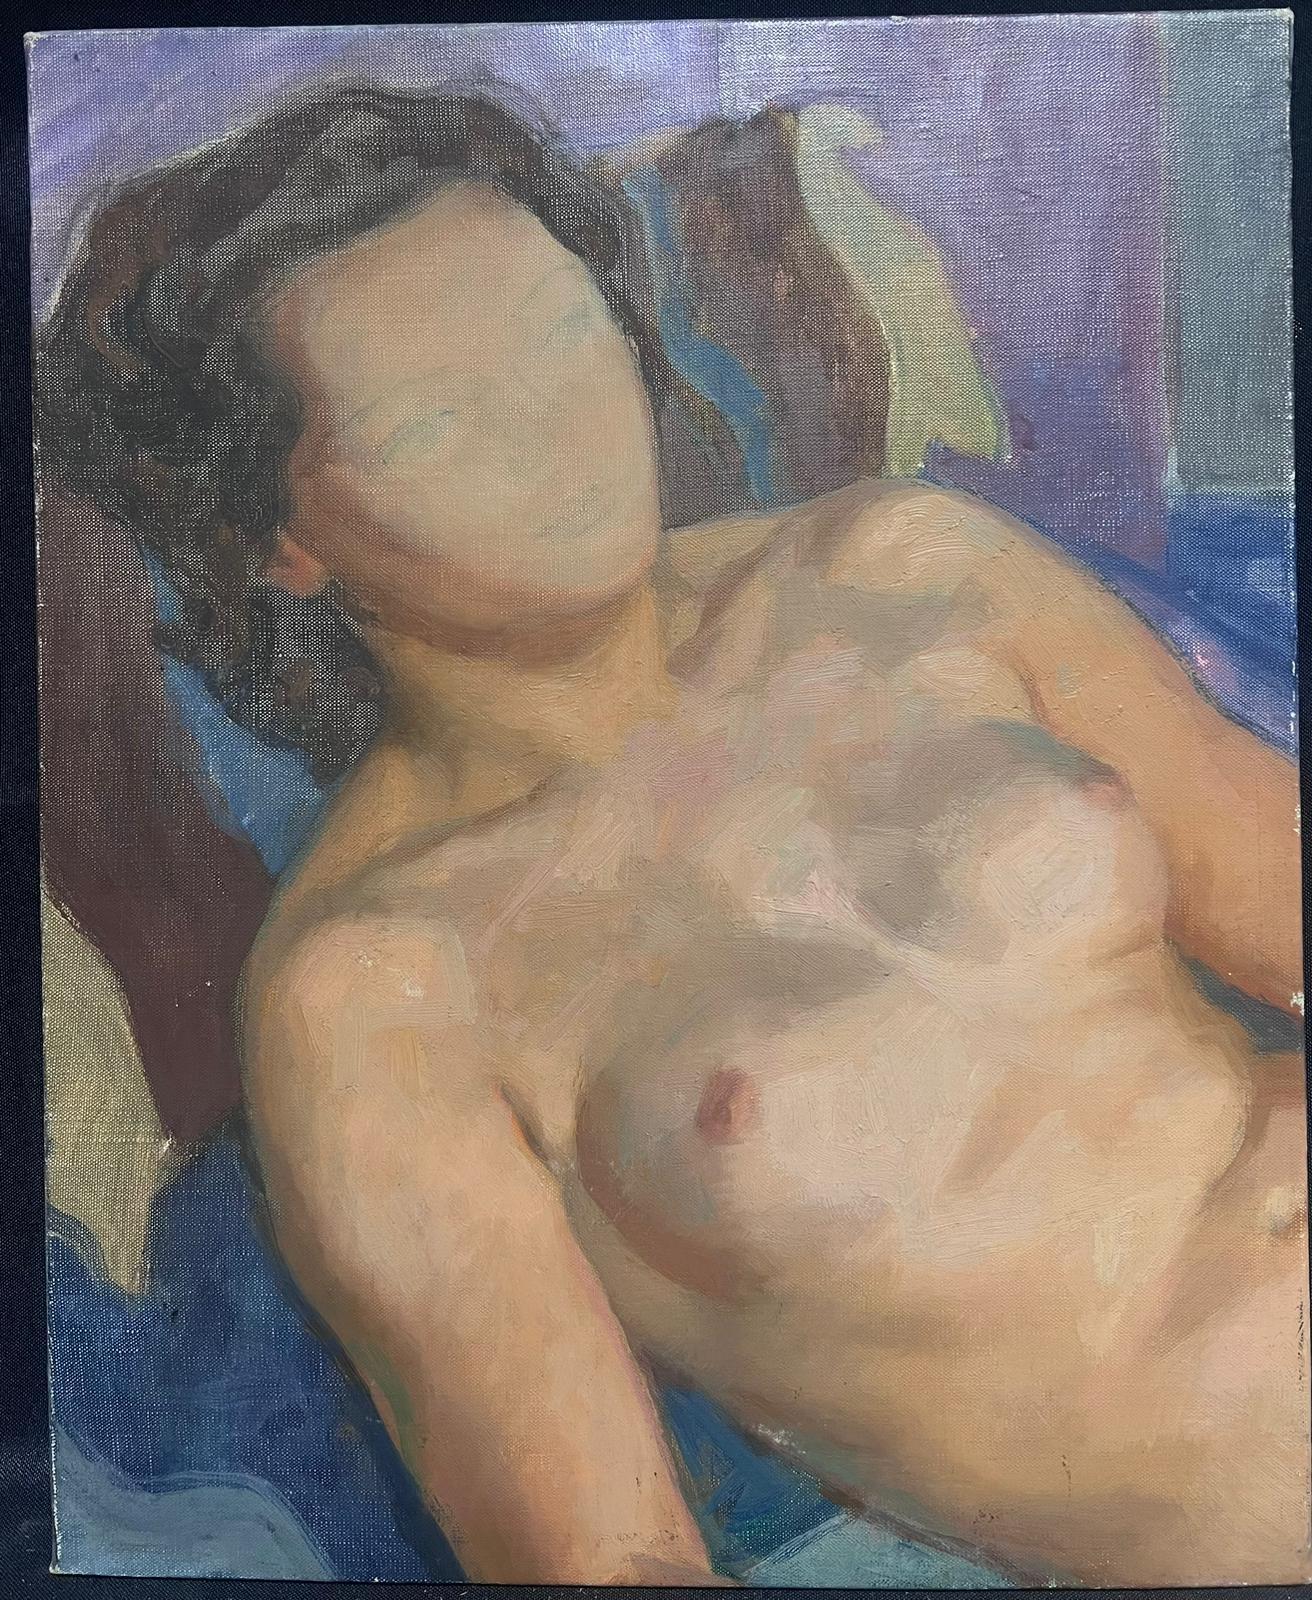 The Nude Model
by Maurice Delavier (French 1902-1986)
stamped verso
oil painting on canvas, 16 x 13 inches
condition: overall good and original
provenance: from a collection of this artists work, France